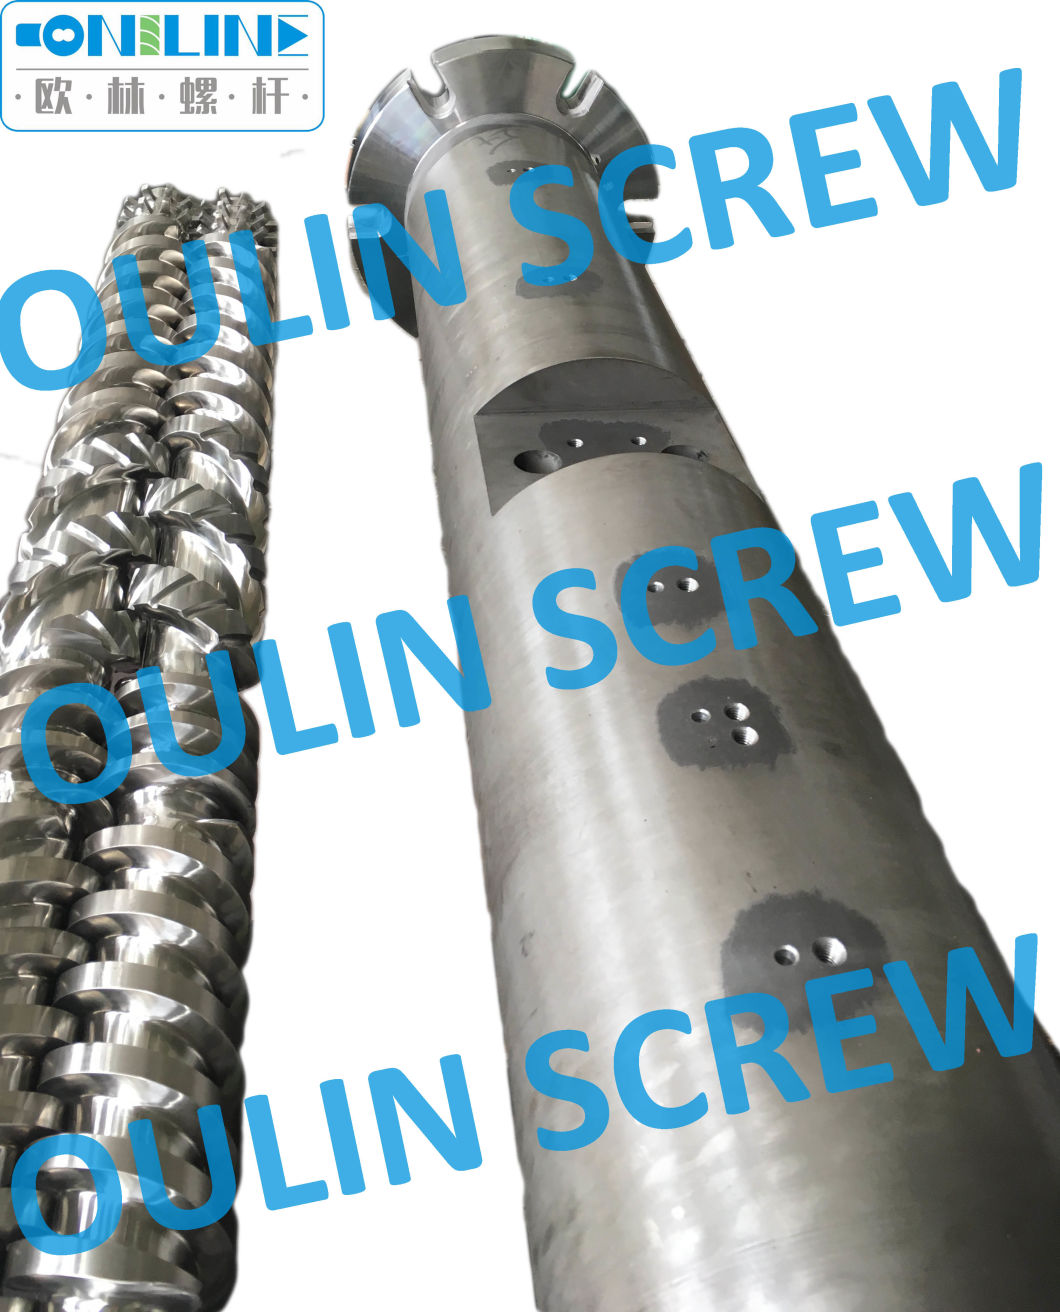 Parallel Screw and Cylinder